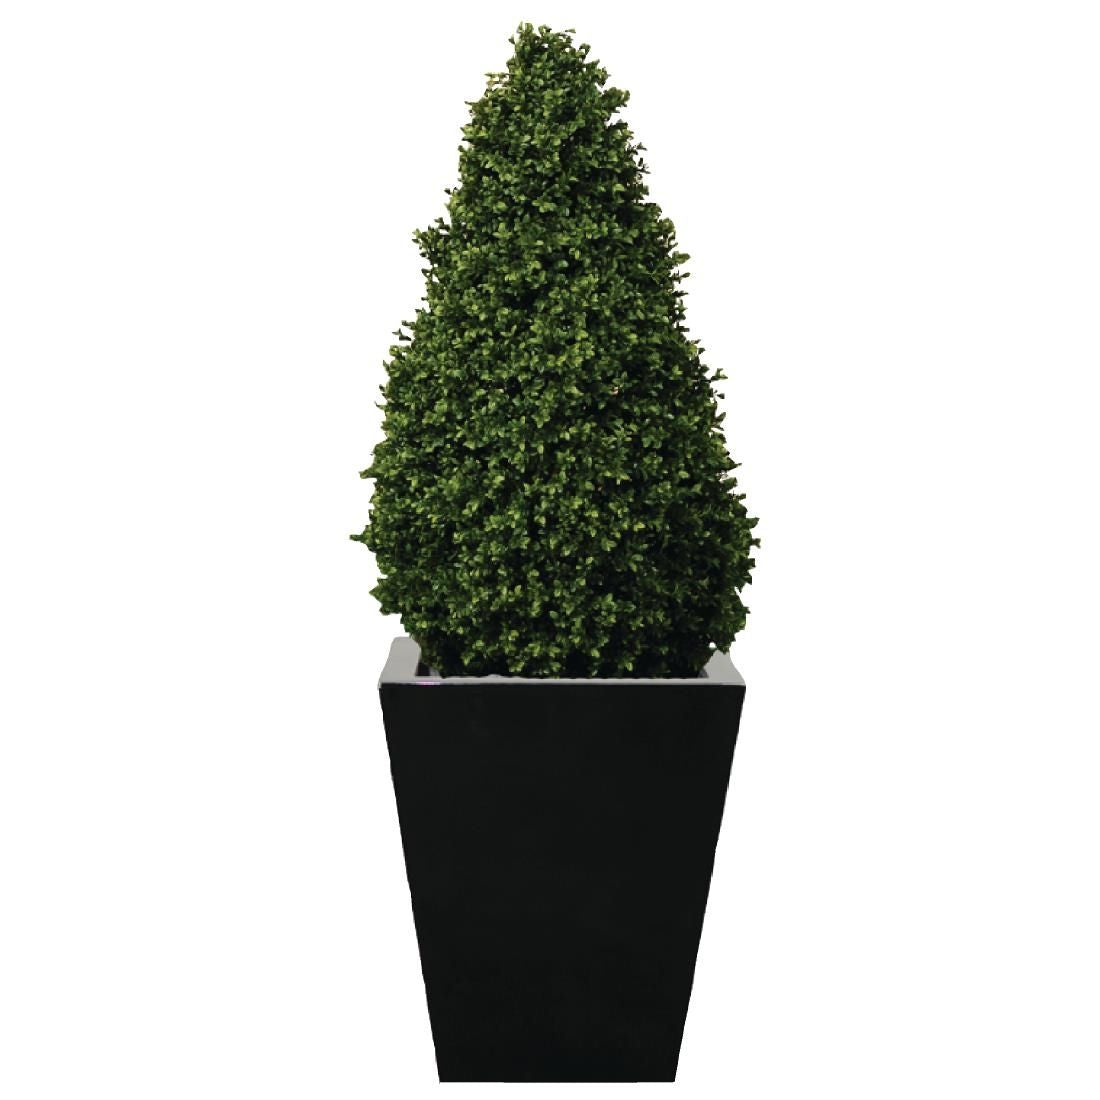 Artificial Topiary Buxus Pyramid 1200mm JD Catering Equipment Solutions Ltd